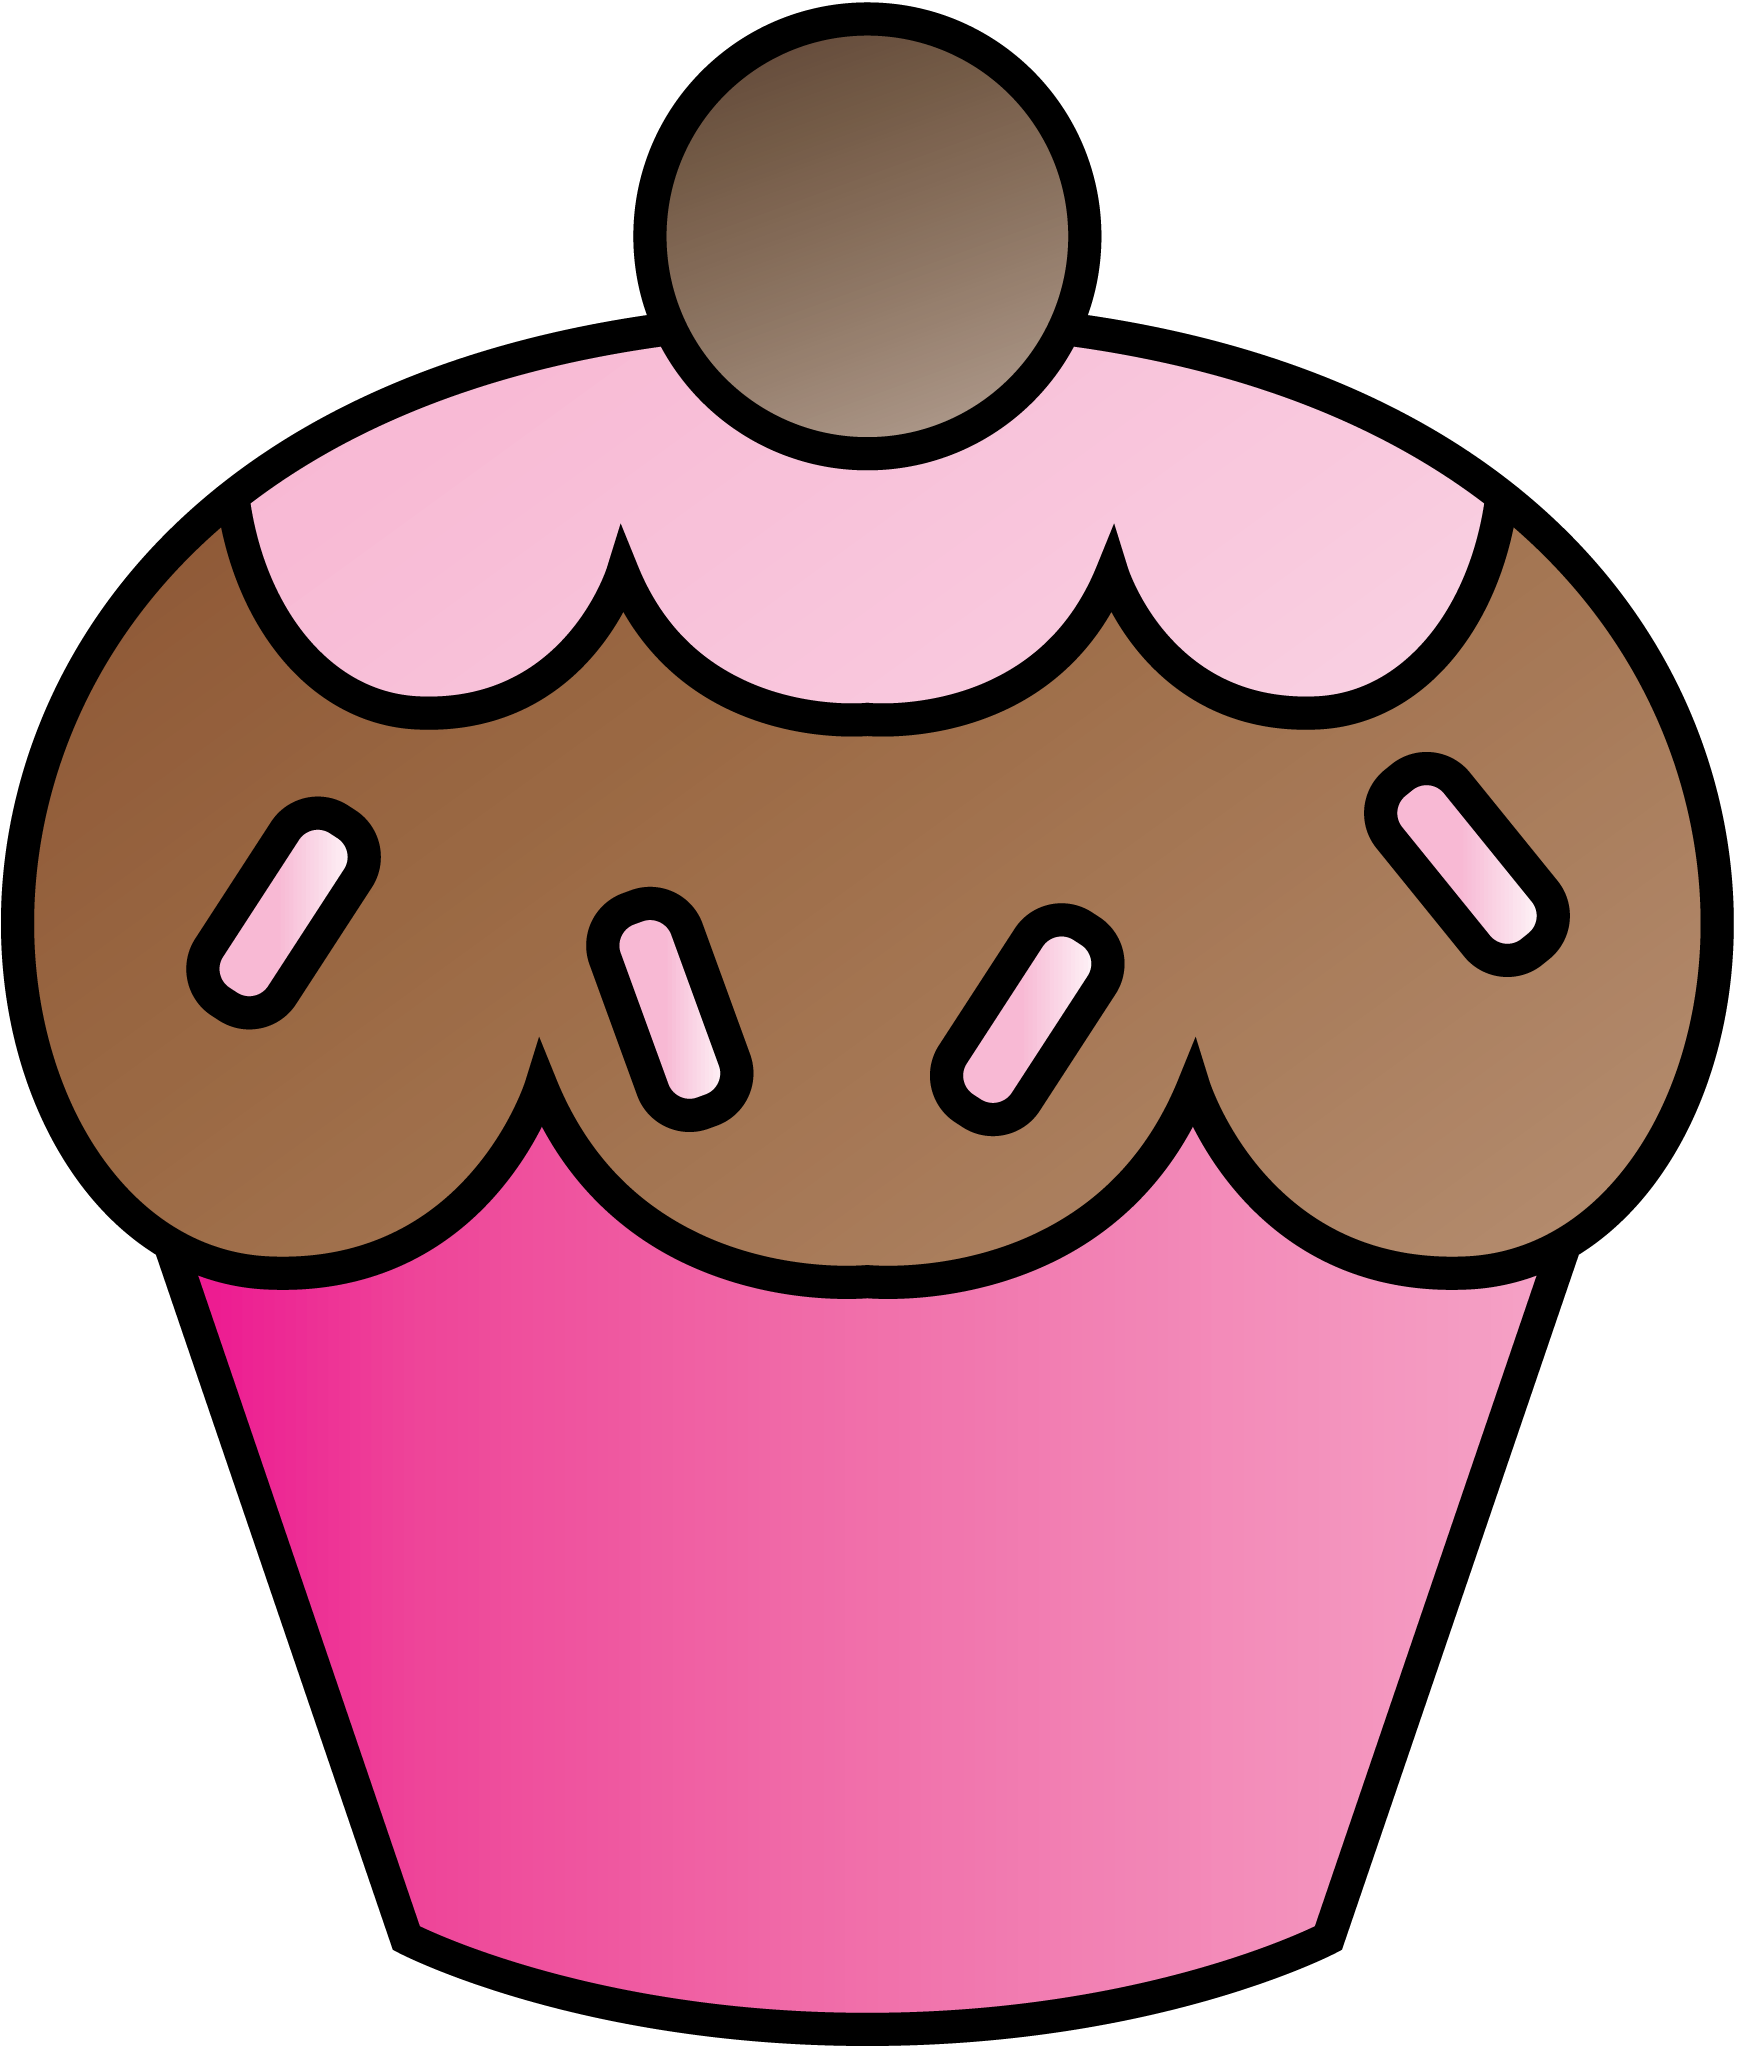 cupcake clipart free download - photo #40